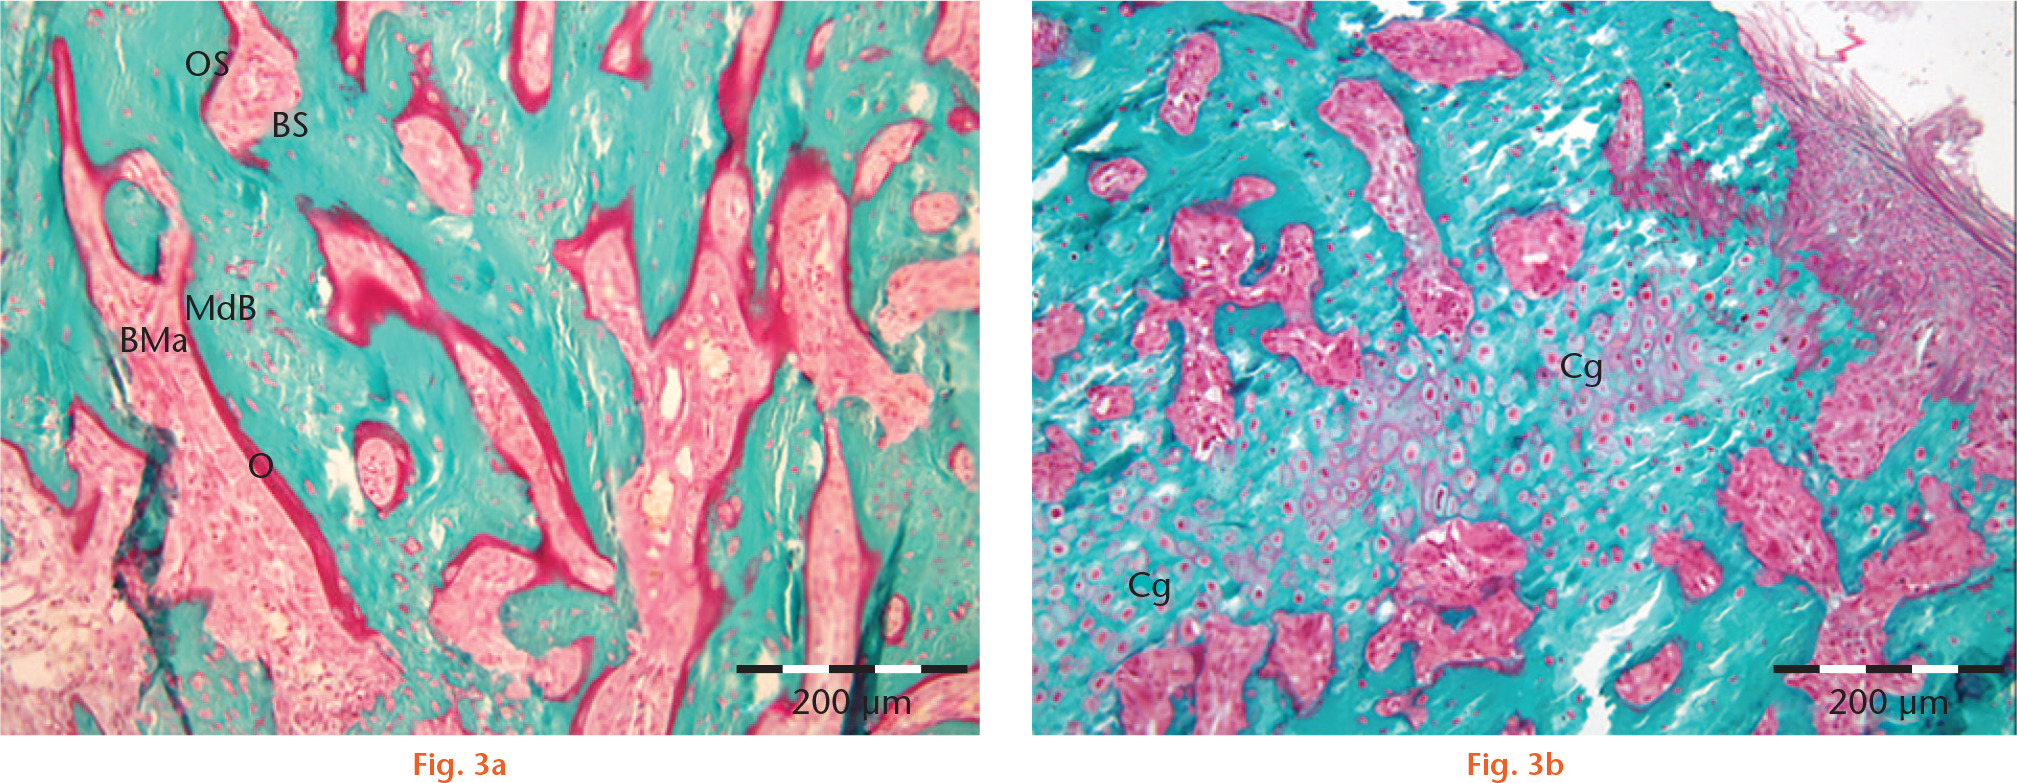 Fig. 3 
            High-power magnification light microscopy of tibial fracture calluses. Masson–Goldner trichrome staining of mineralized tissue provides good differentiation between osteoid (O, purple) and mineralized bone matrix (MdB, green). Non-mineralized bone marrow (BMa, red) is distributed between the mineralized bone trabeculae. a) Woven bone formation (control group) with mainly osteoid trabecular surfaces (OS) and a few bone surfaces (BS). b) An immature region within the callus-containing cartilage (Cg) and partly mineralized matrix with ongoing endochondral ossification. Scale bars = 200 μm.
          